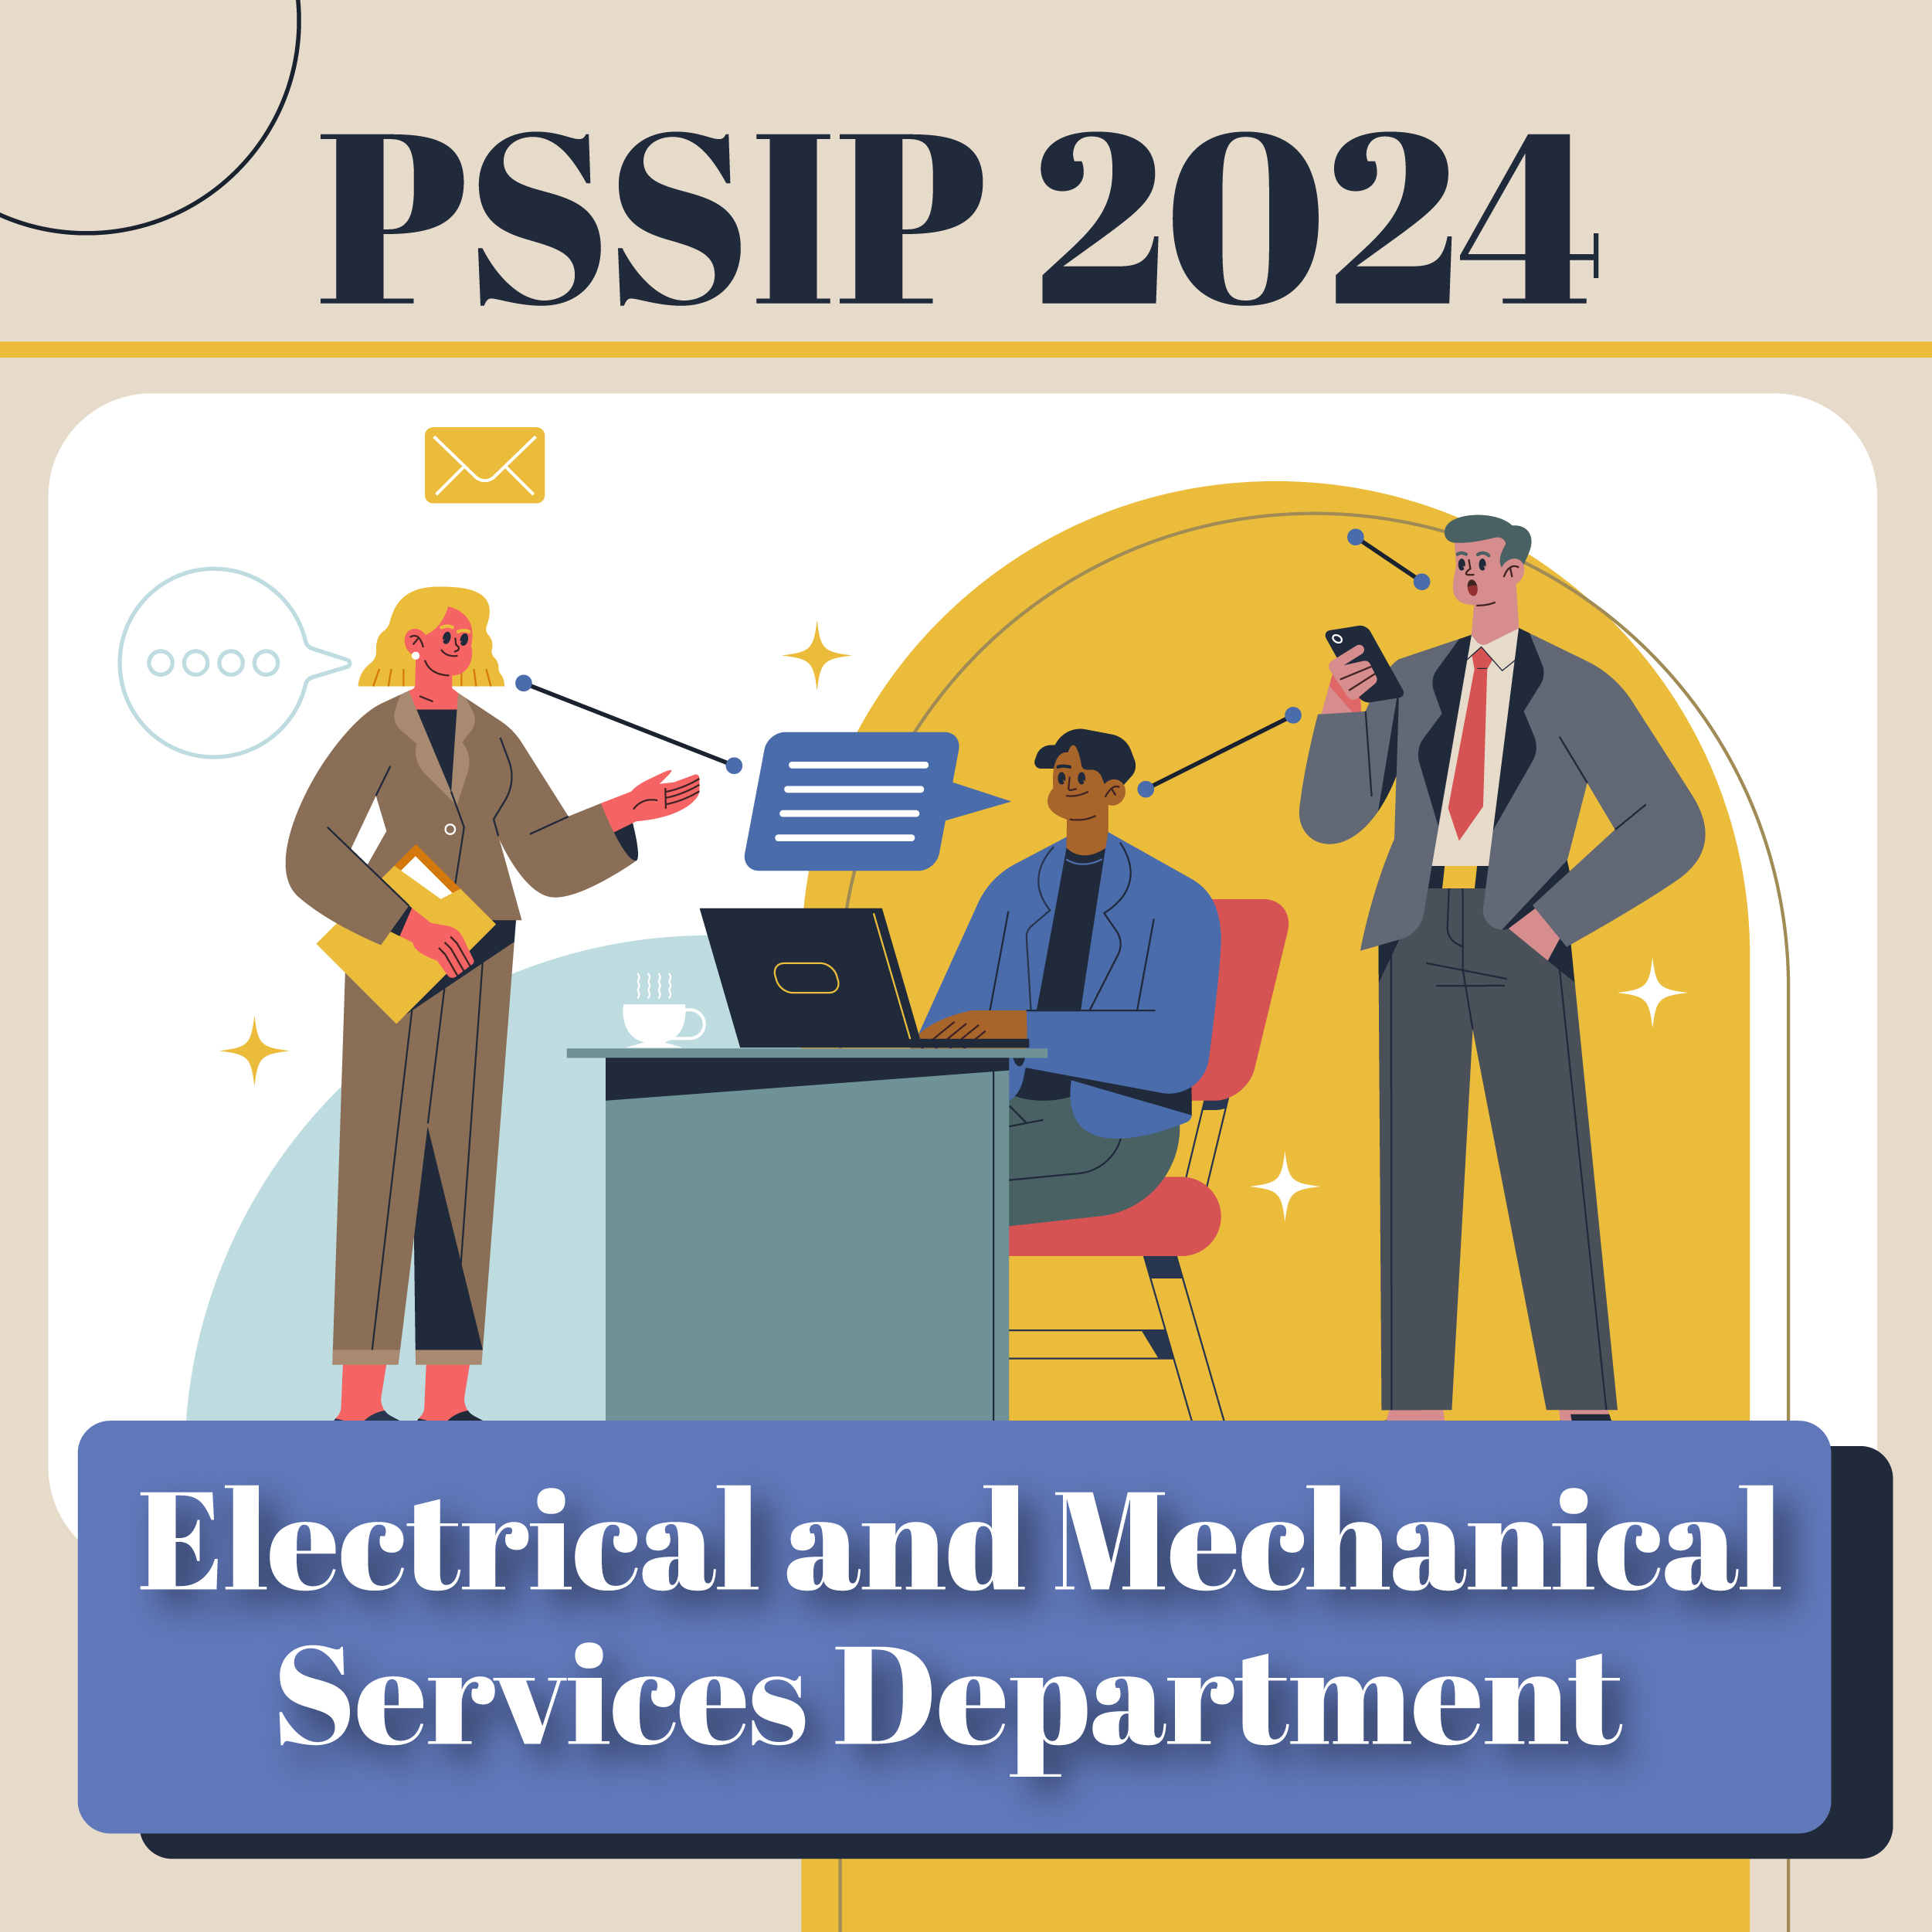 PSSIP2024 – Electrical and Mechanical Services Department